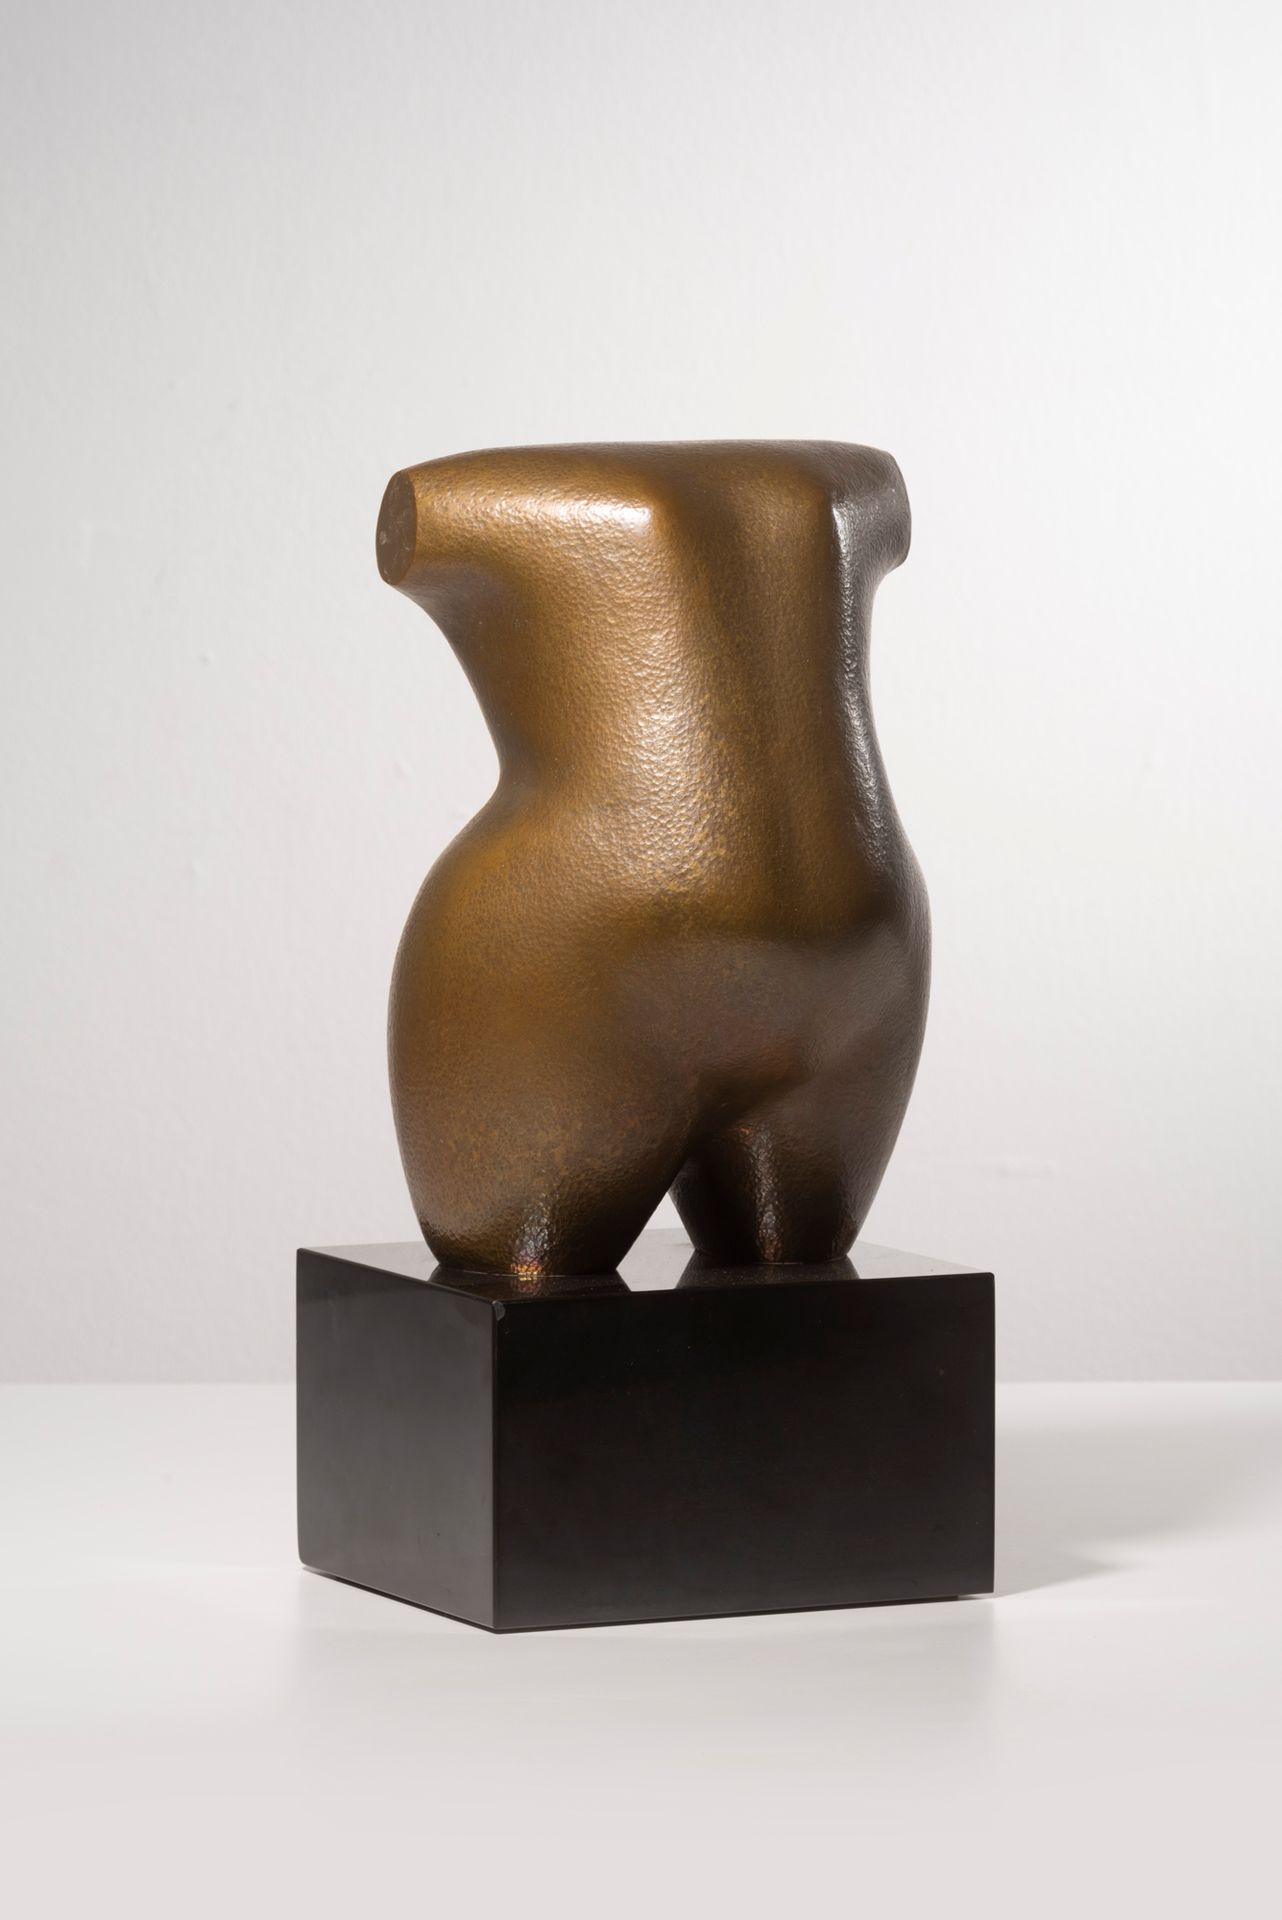 ANDRE EIJBERG (1929-2012) Pomona, 1968
Hammered bronze with brown patina on marb&hellip;